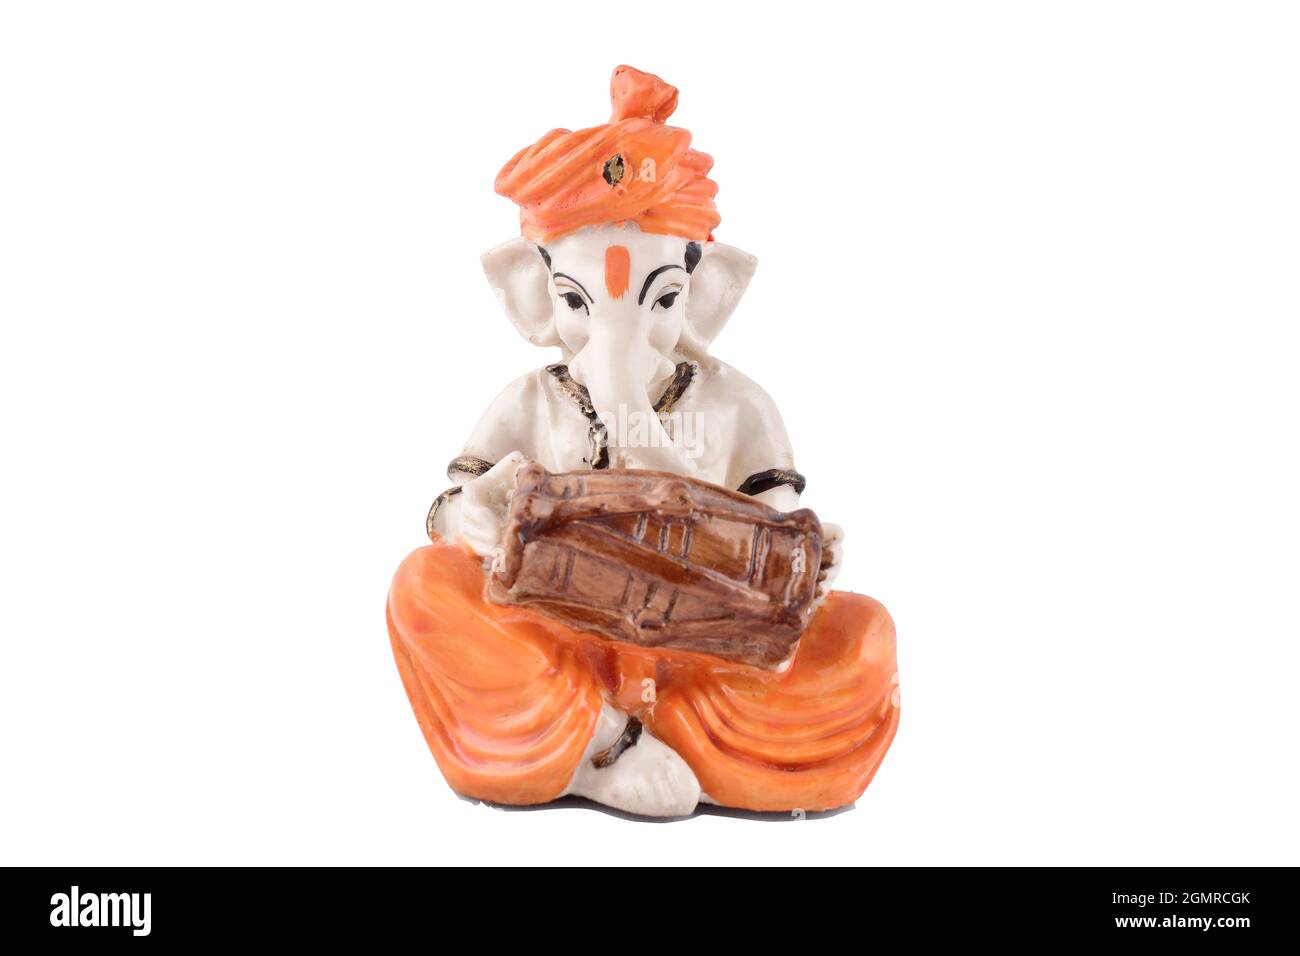 Indian god Ganesh playing dholak isolated on white background with clipping path, lord Ganesh Stock Photo